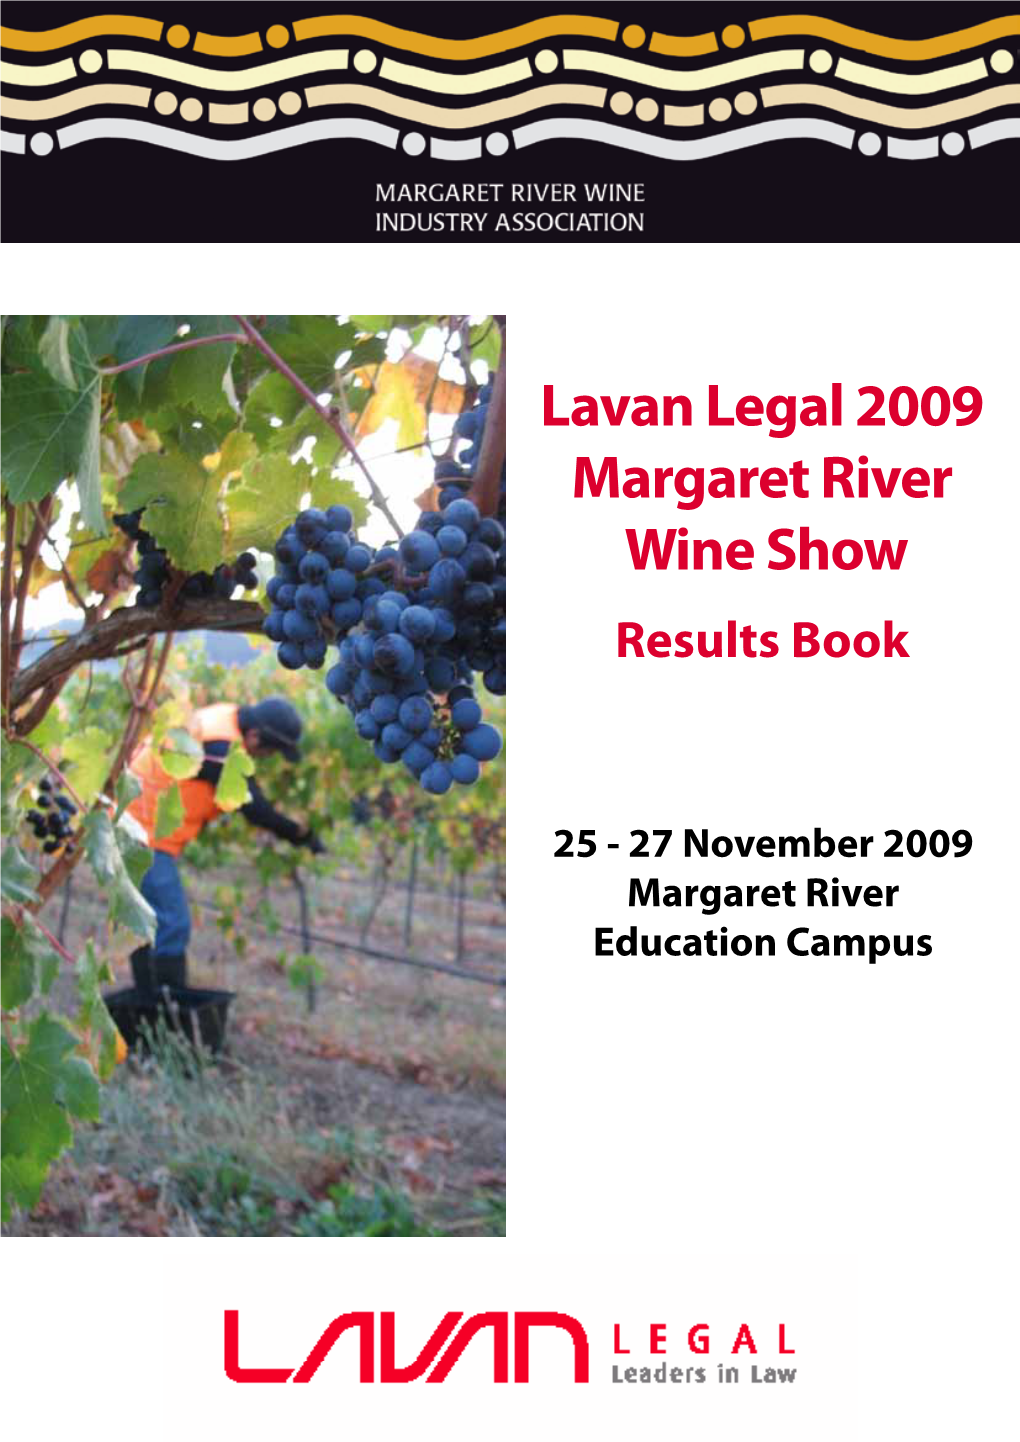 2009 Margaret River Wine Show Results Book